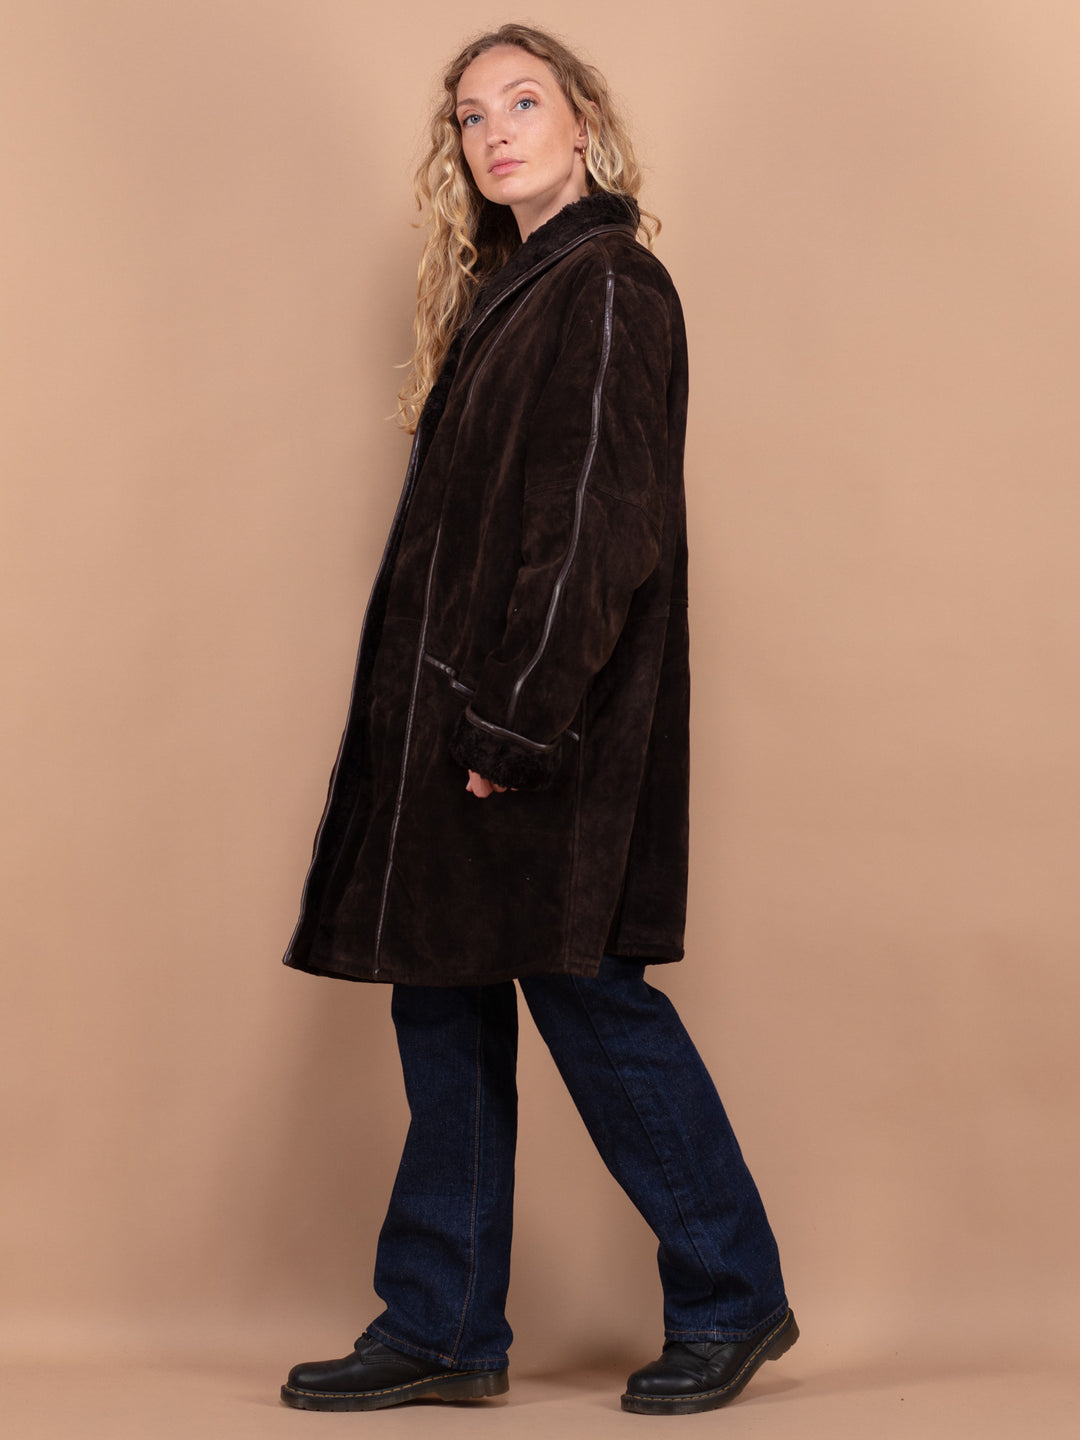 Oversized Suede Coat, 80's Brown Suede Coat Size Large XL, Women Suede Coat, Minimalist Mod Style Coat, Vintage Women Clothing, Pre Owned